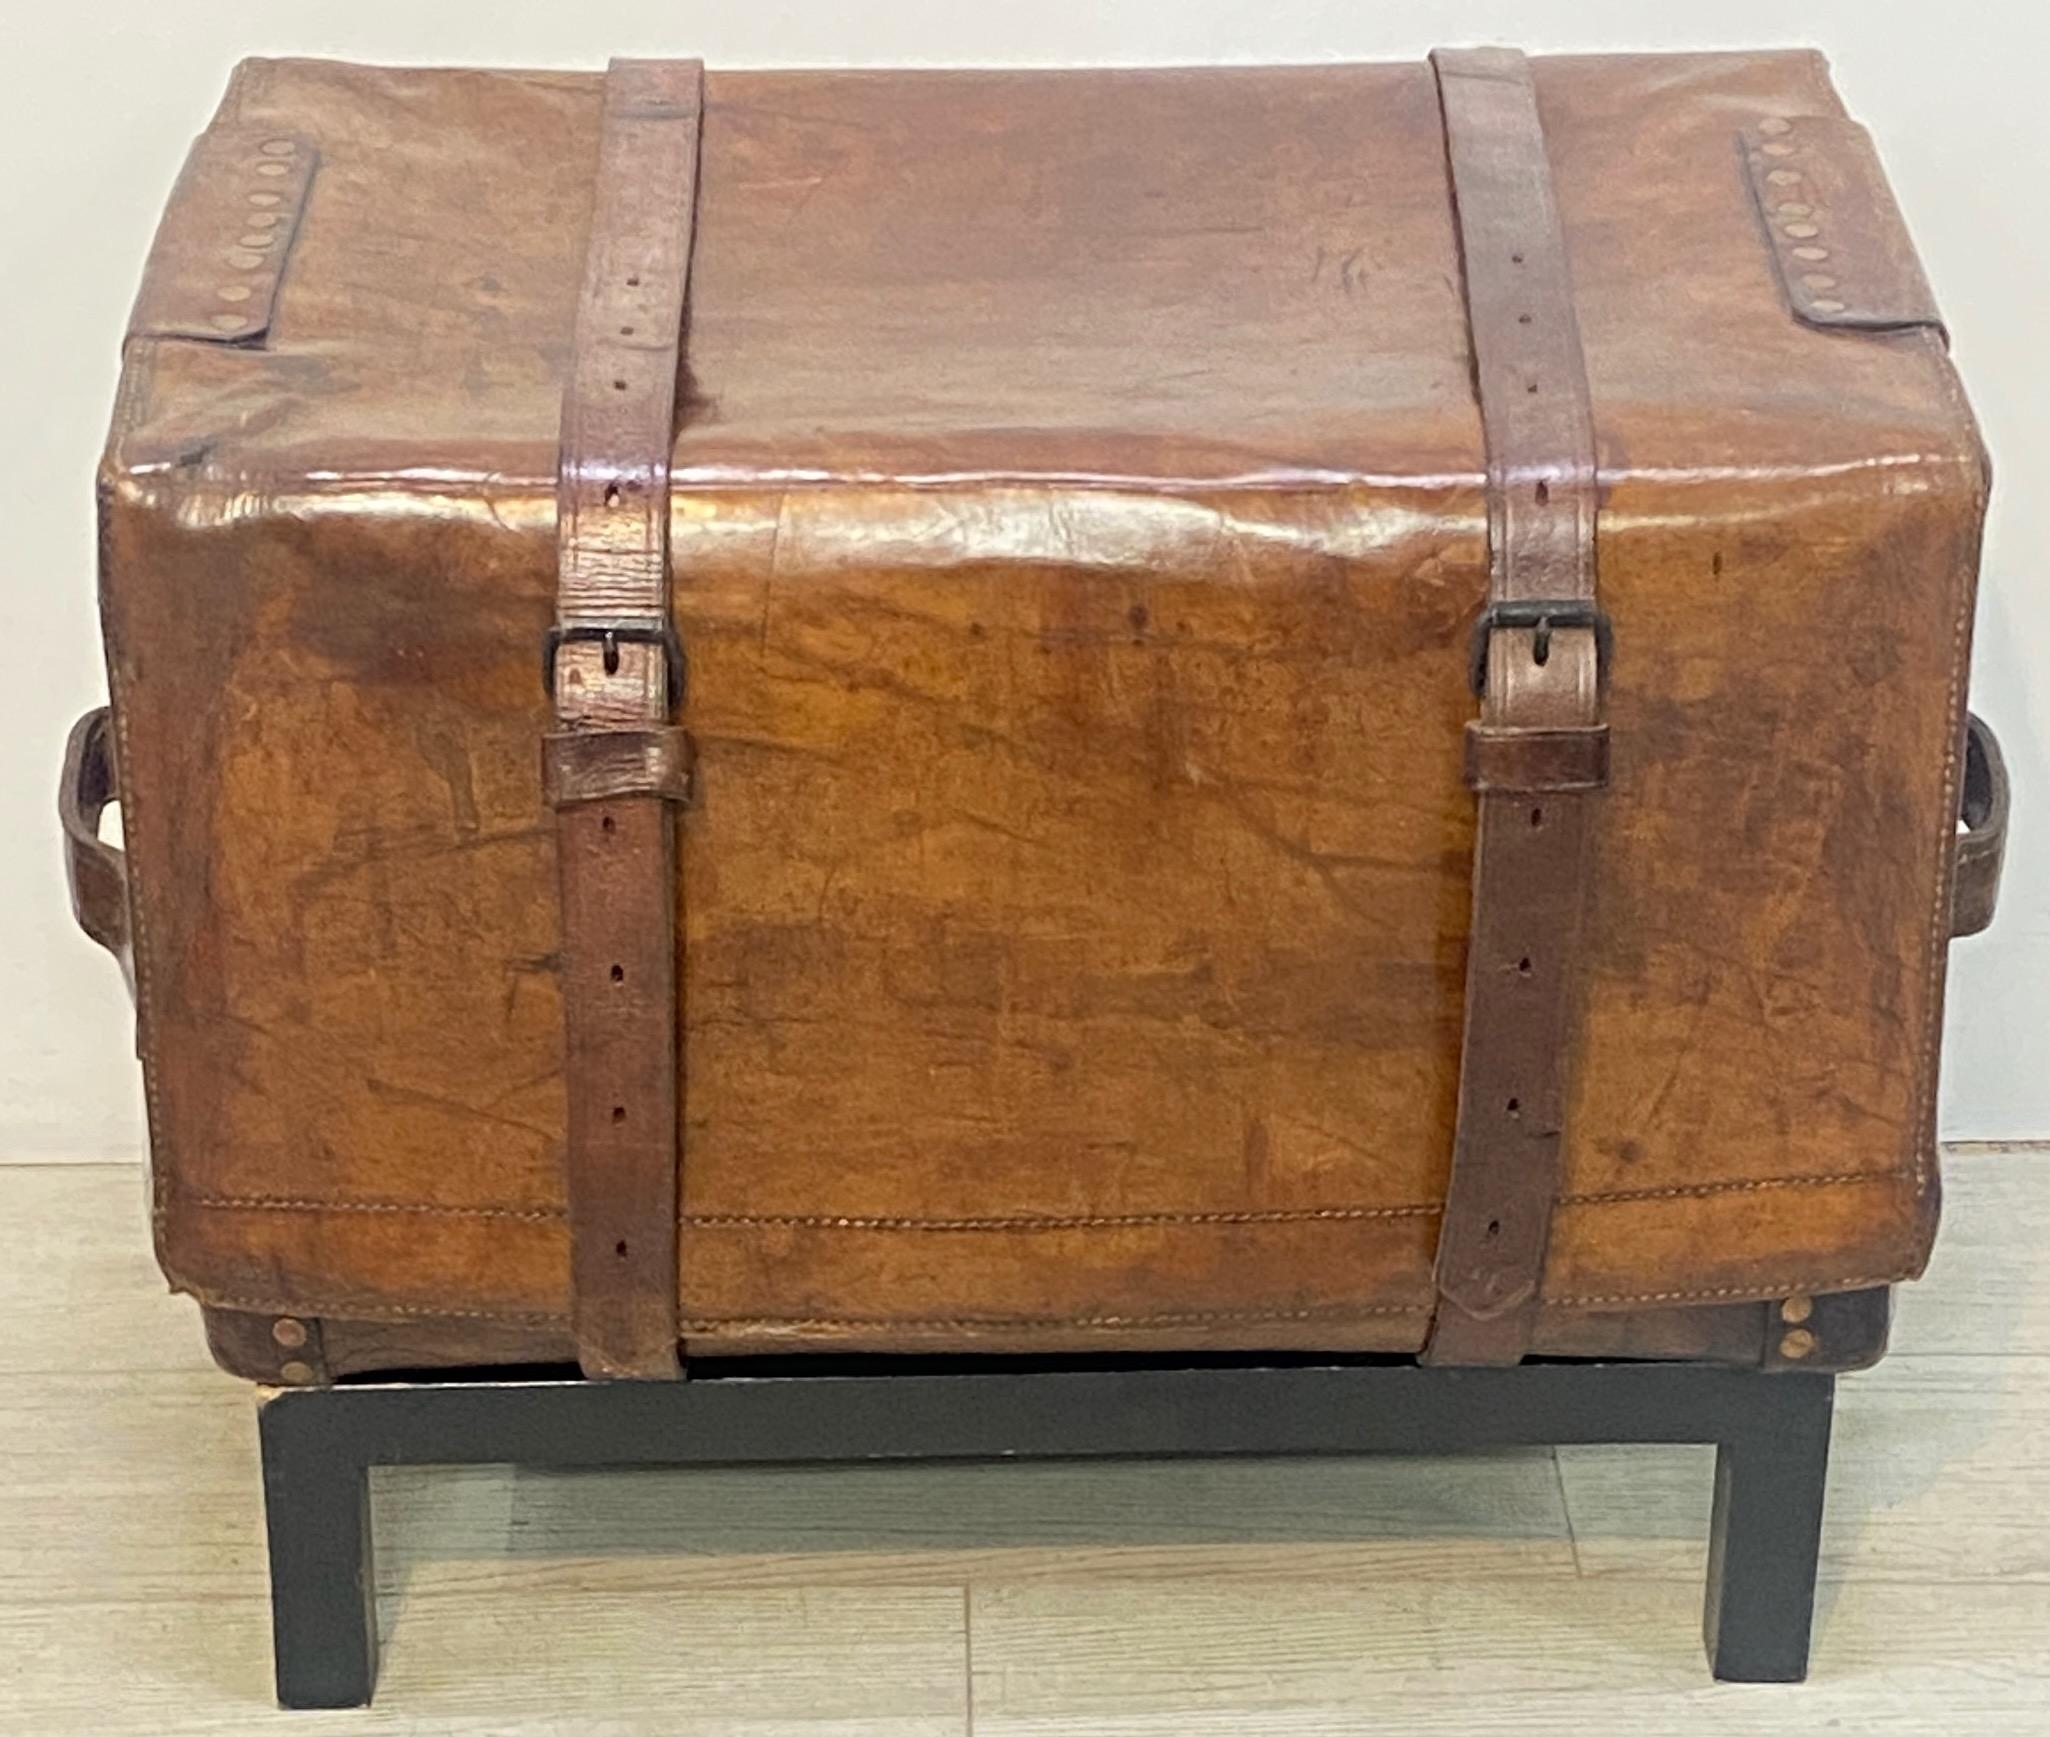 An impressive and possibly unique custom made leather carriage trunk. 
This could also be used as an end table with a glass top, or a seat if reinforced on the inside. Having original horse hide straps and blue and white cotton ticking interior